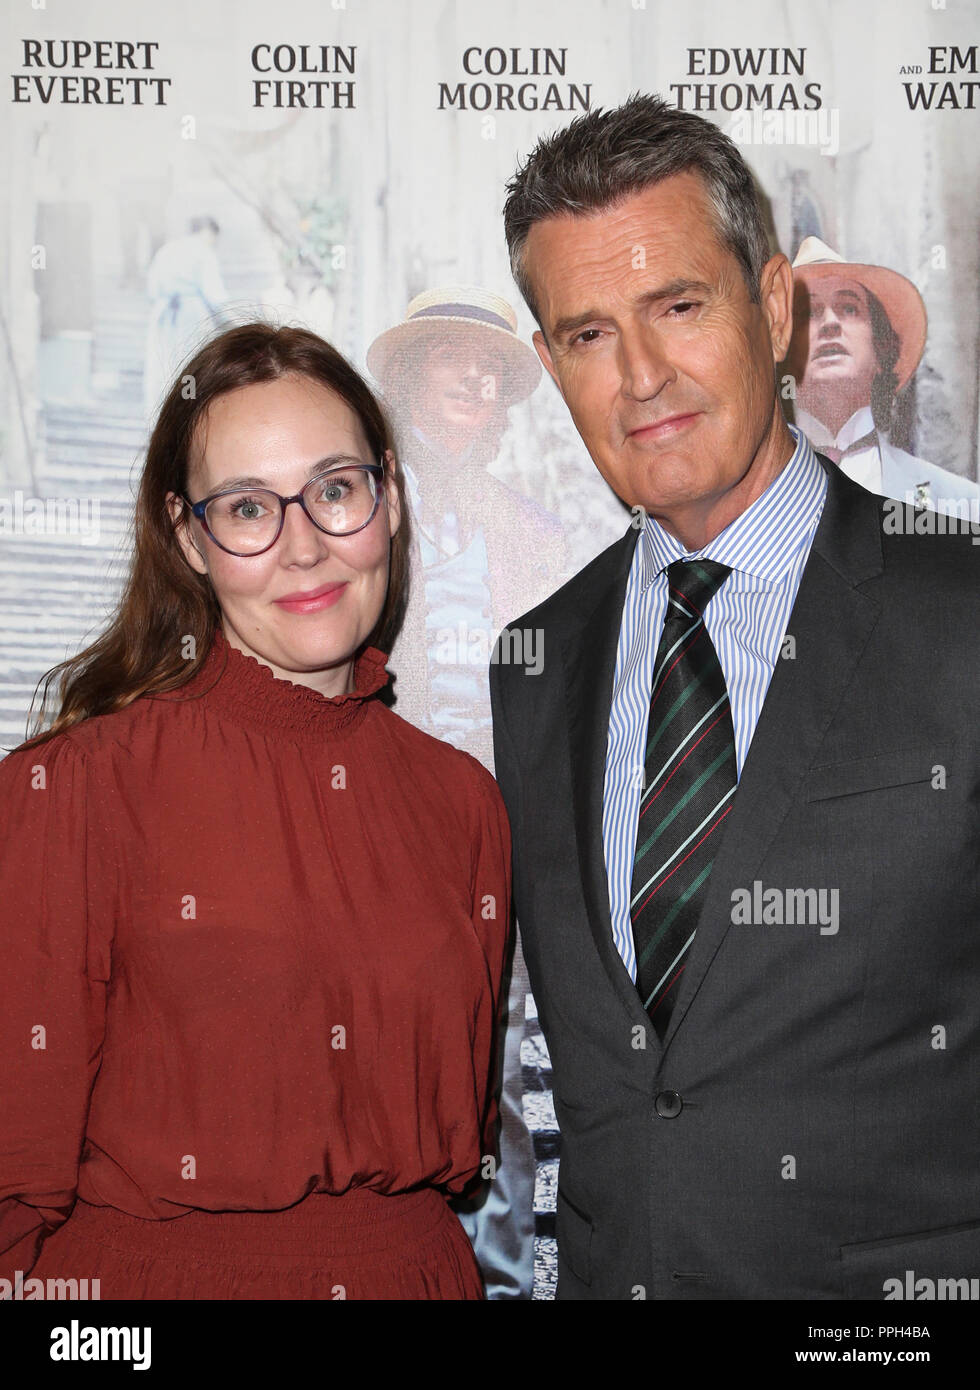 Beverly Hills, California, USA. 25th Sep, 2018. Jennifer Cochis, Rupert Everett, at 2018 LA Film Festival - Gala Screening Of 'The Happy Prince' at Wallis Annenberg Center for the Performing Arts in Beverly Hills California on September 25, 2018. Credit: Faye Sadou/Media Punch/Alamy Live News Stock Photo